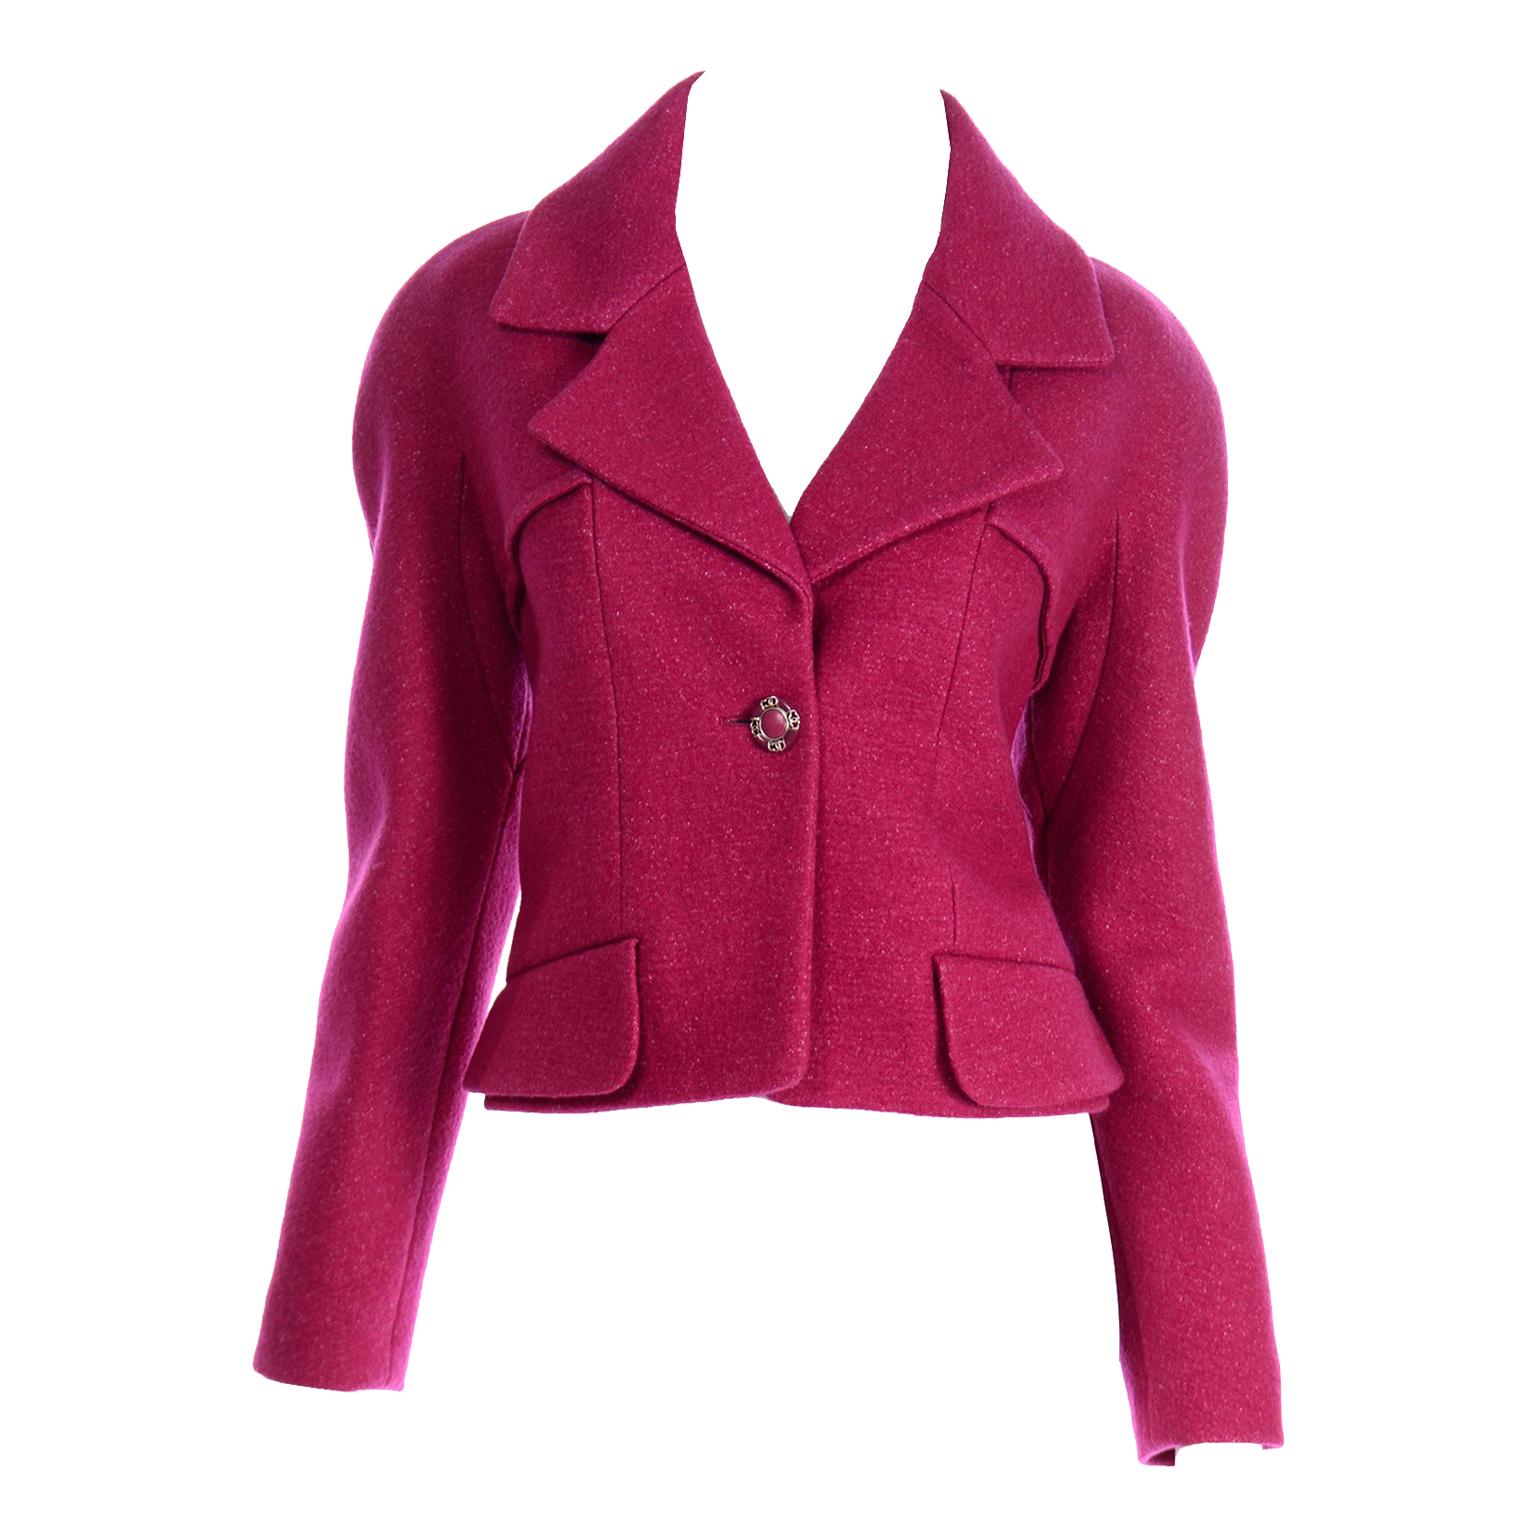 Chanel New With Tags 2018 Raspberry Pink Wool Blend Jacket Deadstock